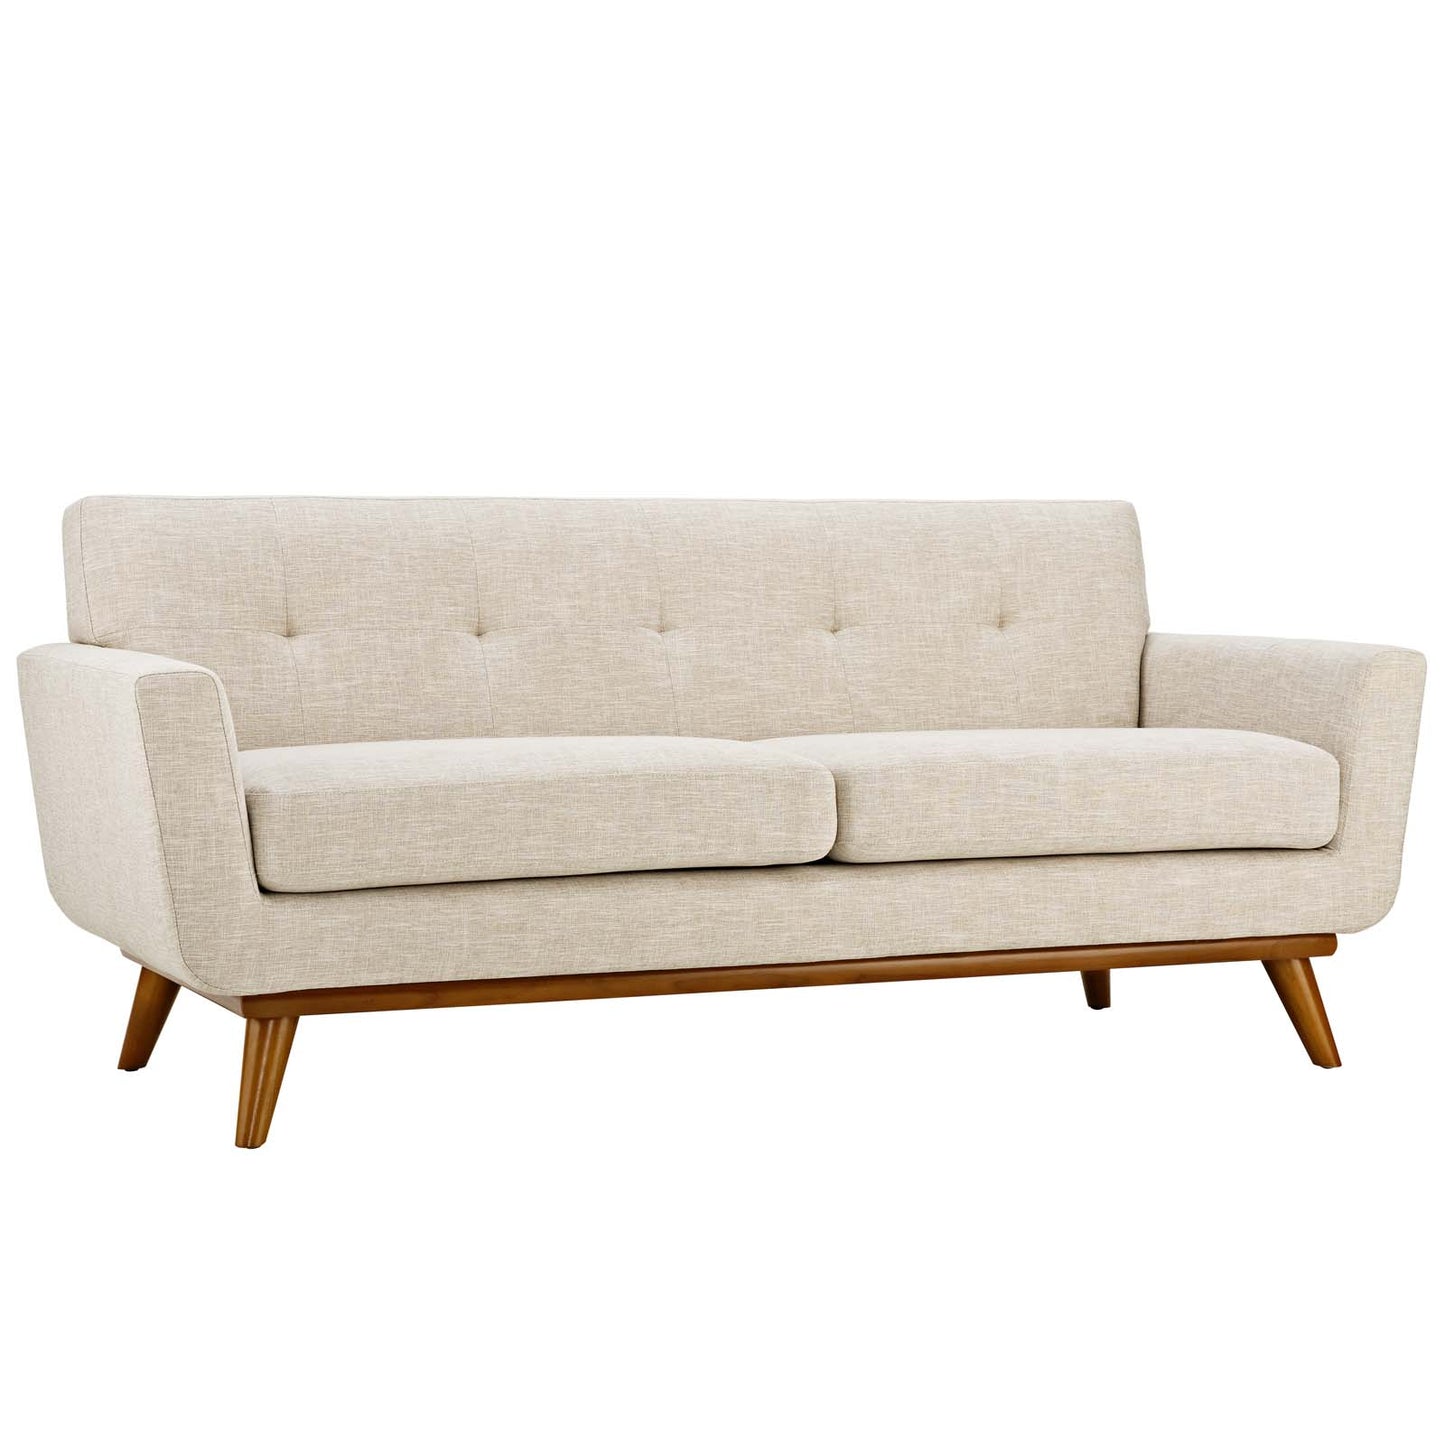 Engage Sofa Loveseat and Armchair Set of 3 Beige EEI-1349-BEI